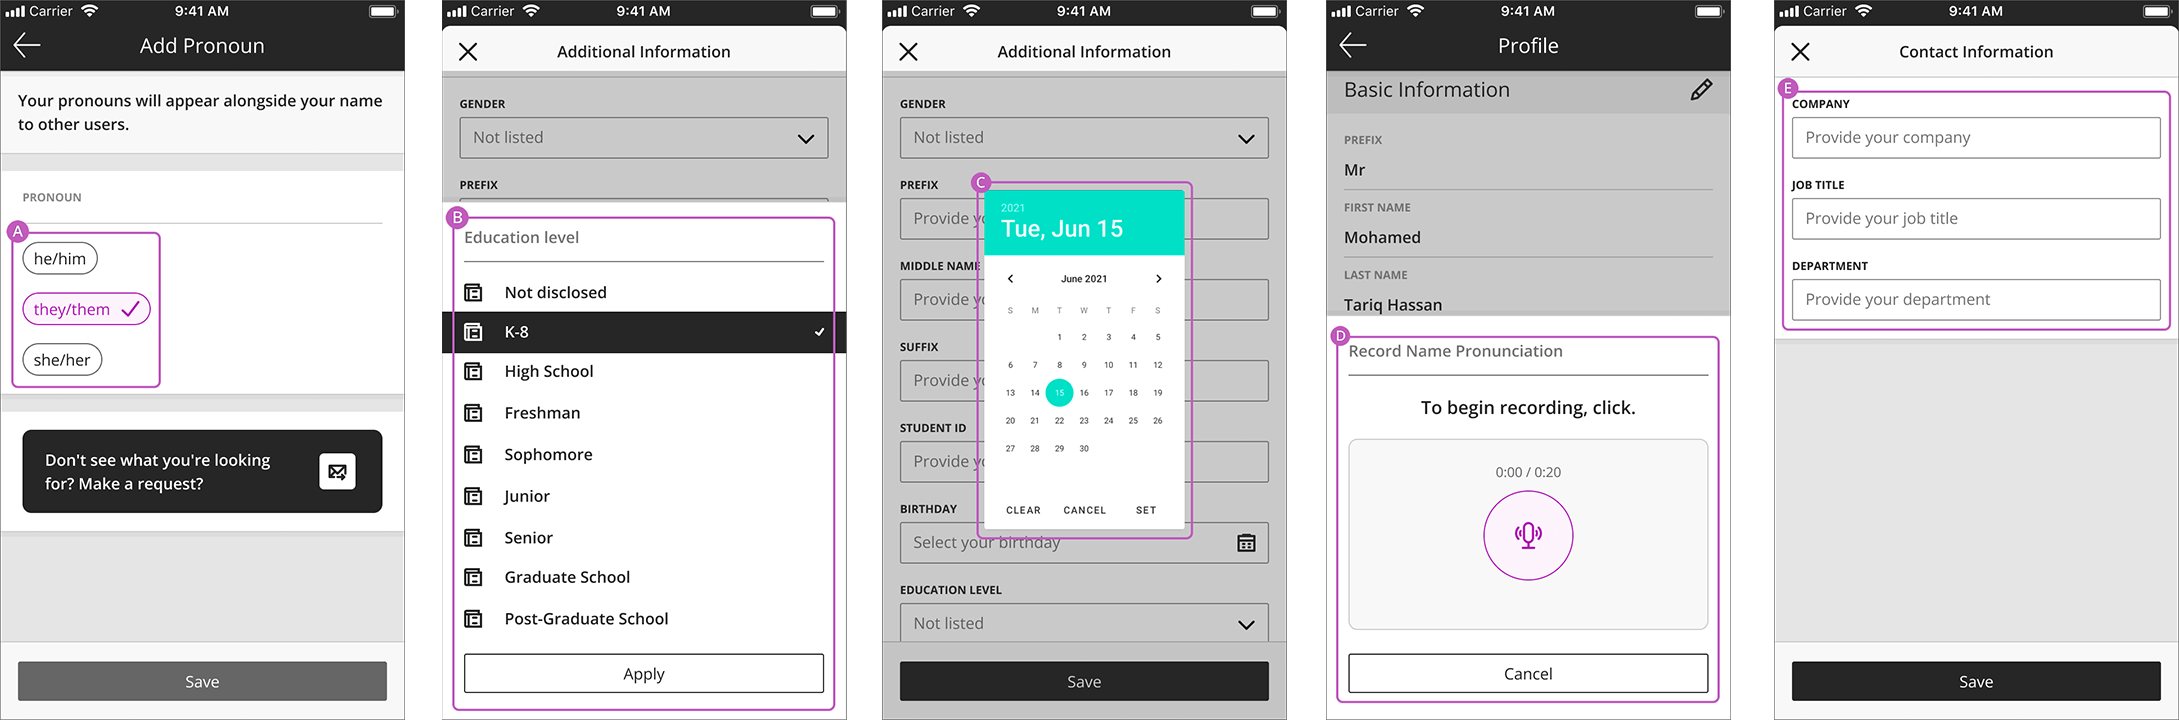 The image shows the 5 different type of fields that can be filled in on the profile: A) select an option, B) choose an item from a dropdown list, C) select a date on the calendar, D) record a voice note, or E) provide an open-ended response in a text field.